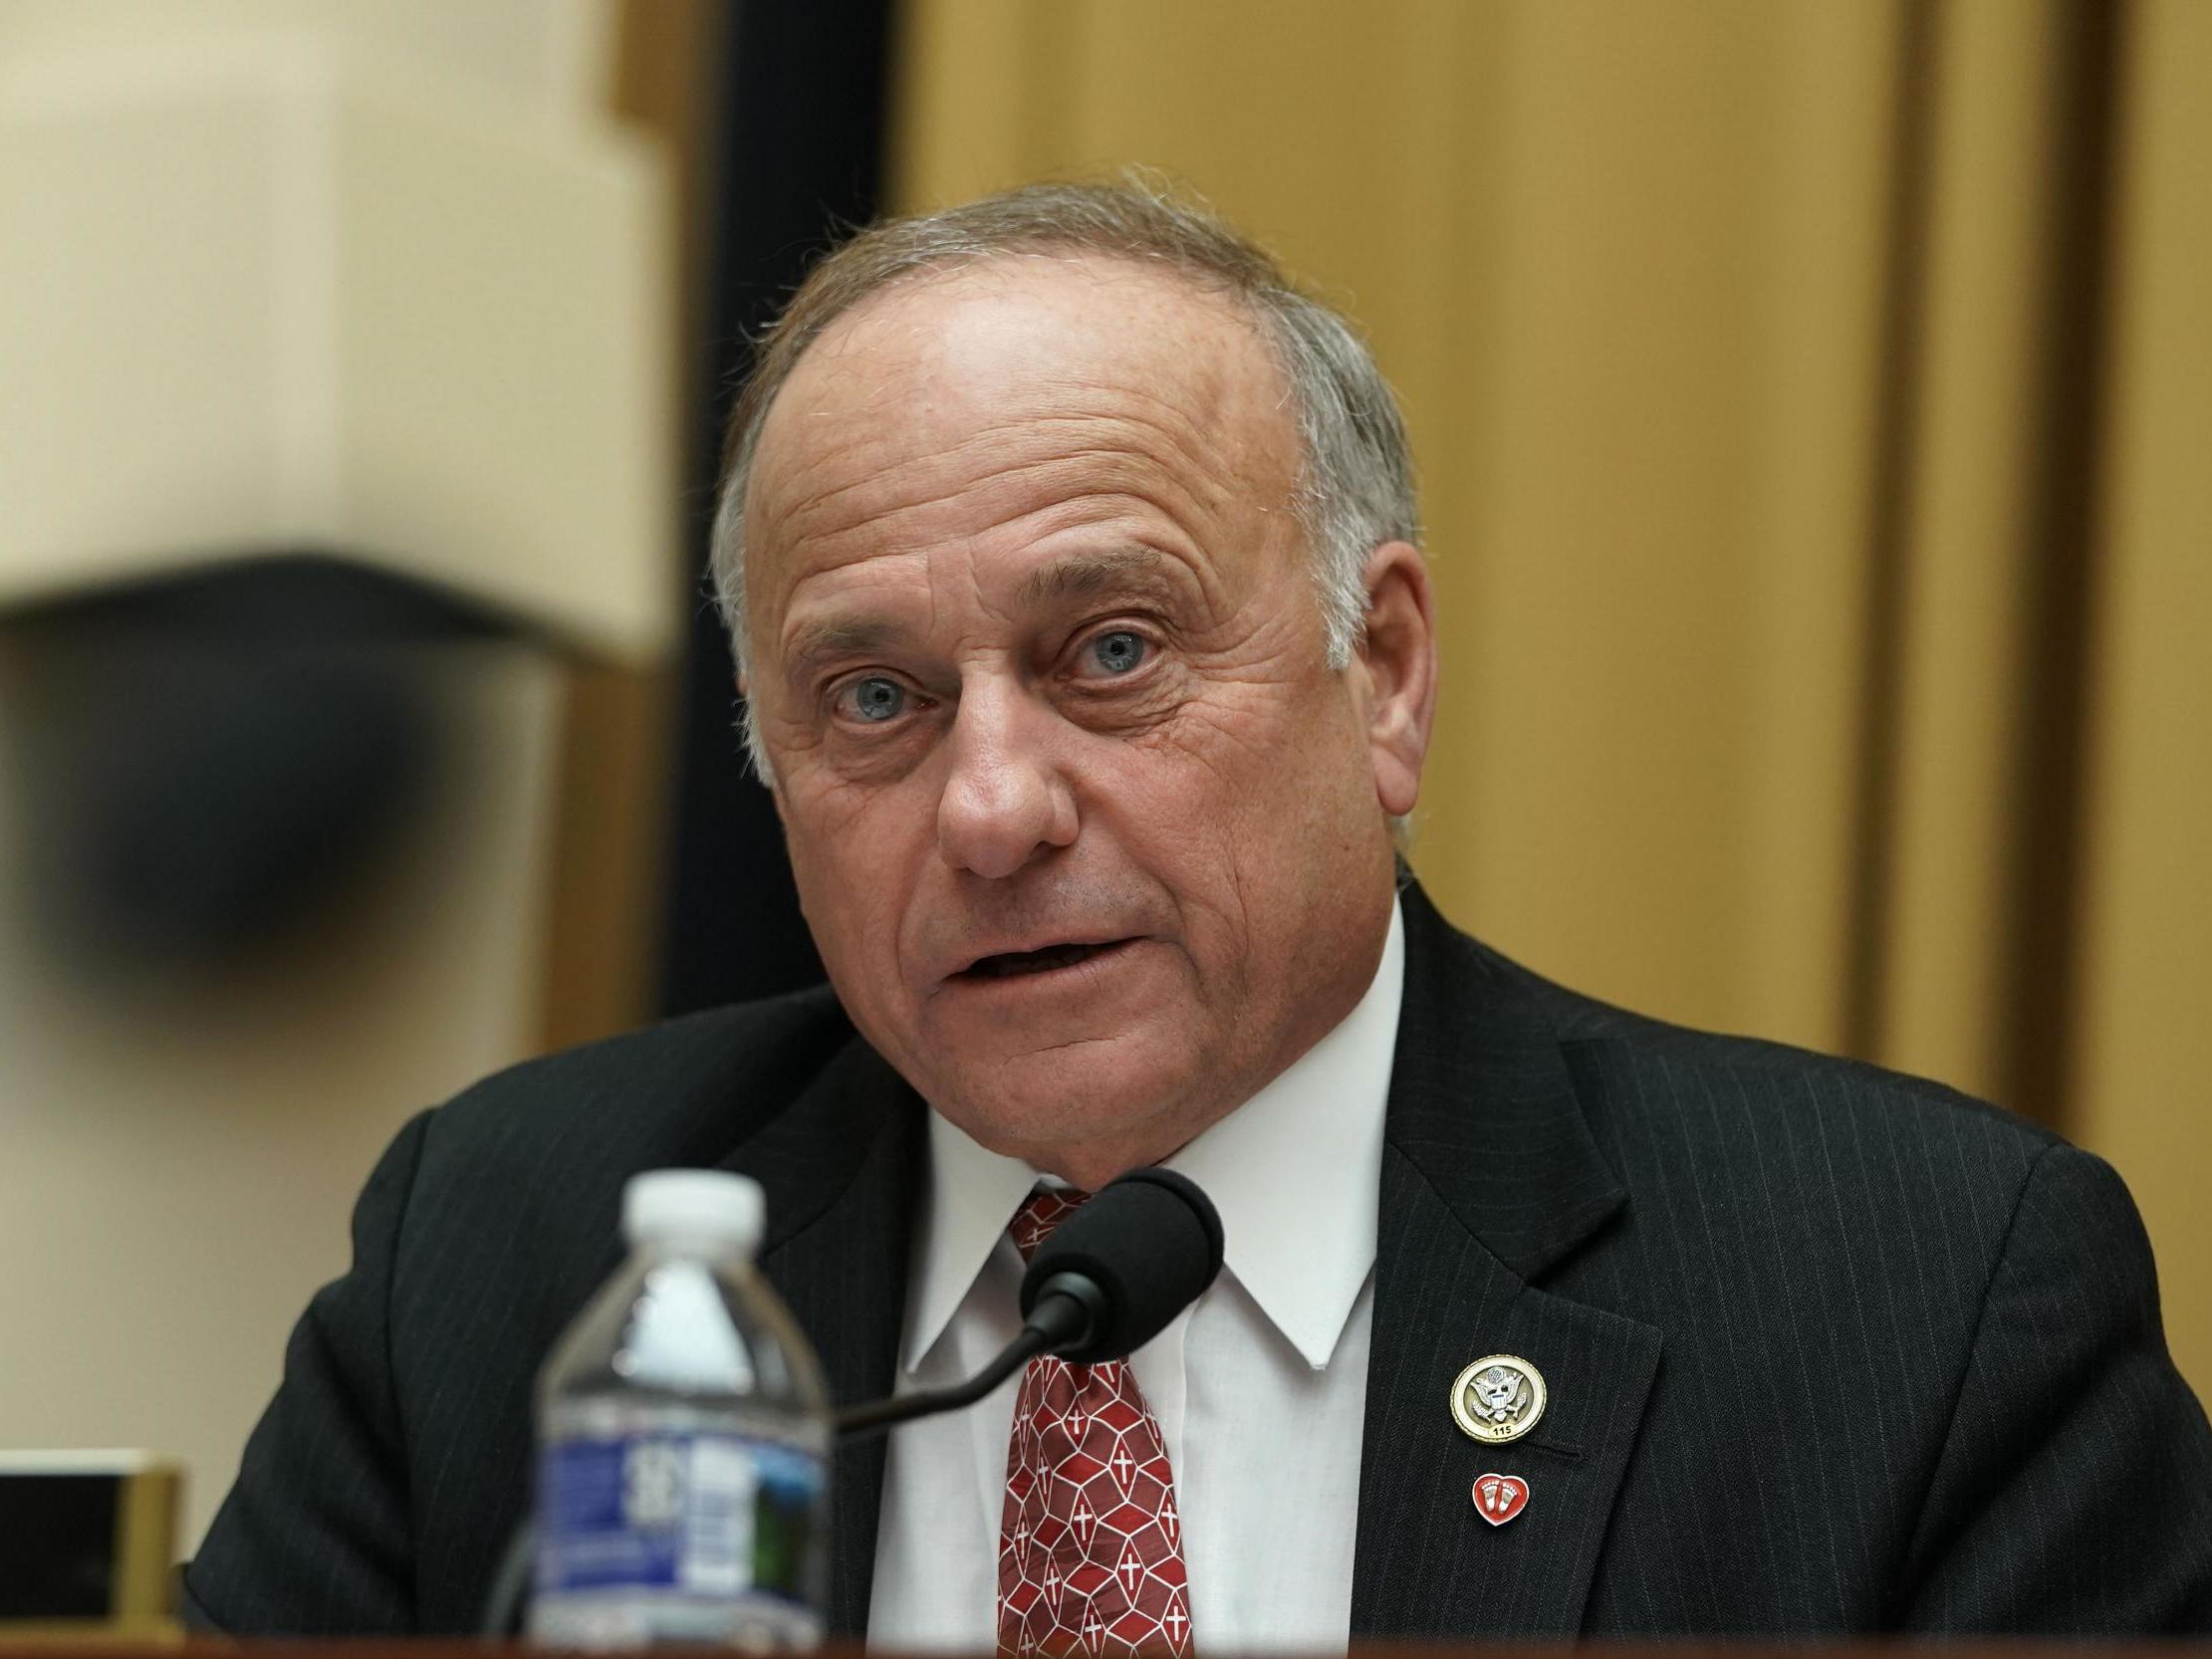 Republican congressman Steve King pranked into thanking fictional US marine on July 4